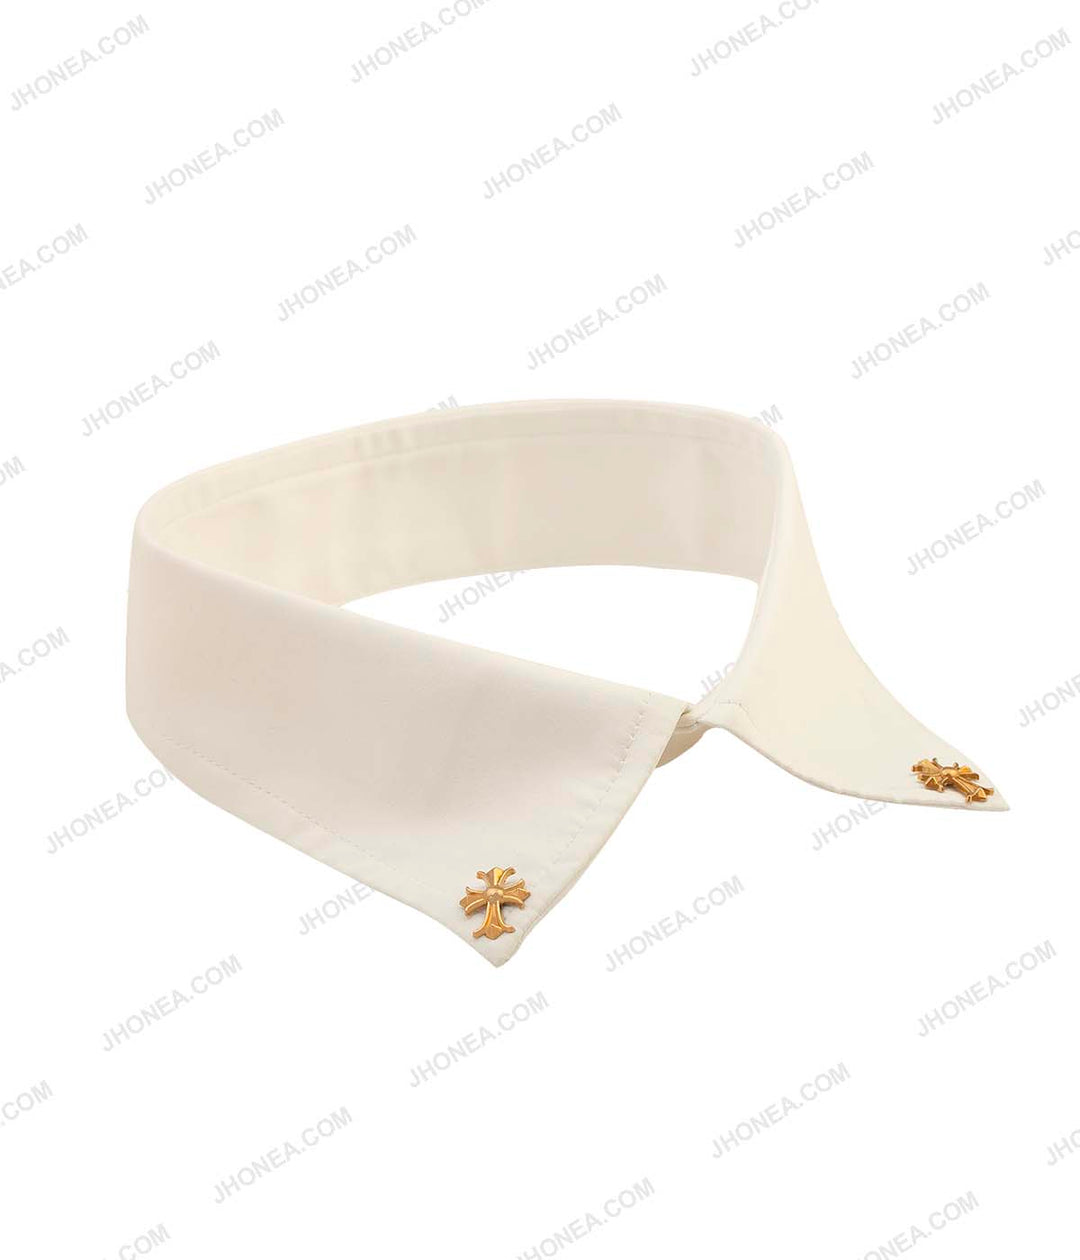 Fashion Golden Collar Tips with Cross Sign Motif For Men